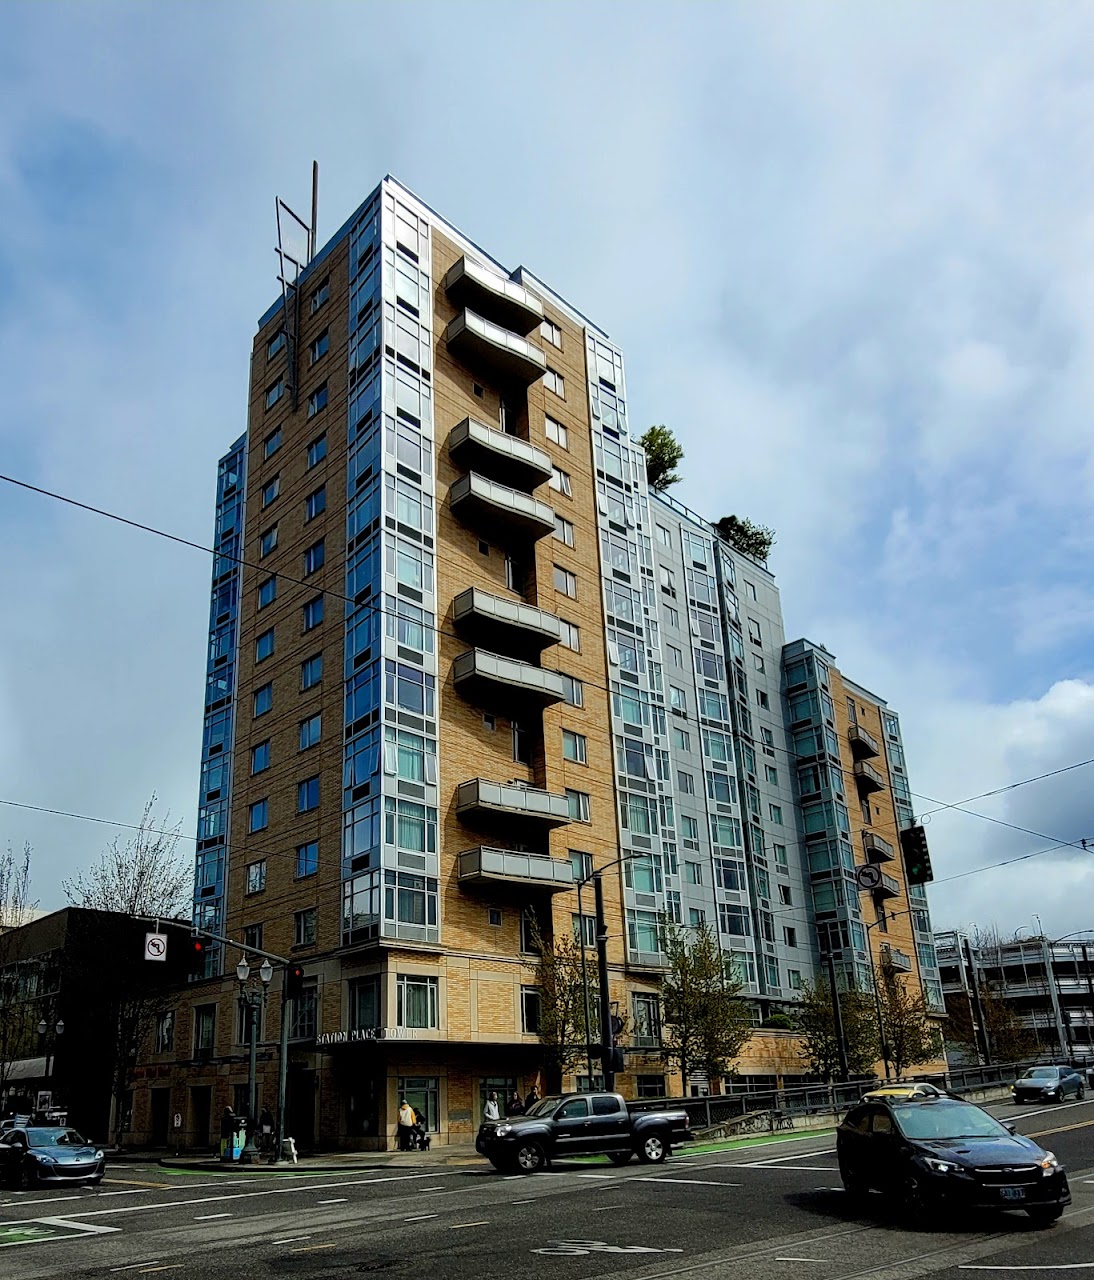 Photo of STATION PLACE TOWER. Affordable housing located at 1020 NW NINTH AVE PORTLAND, OR 97209